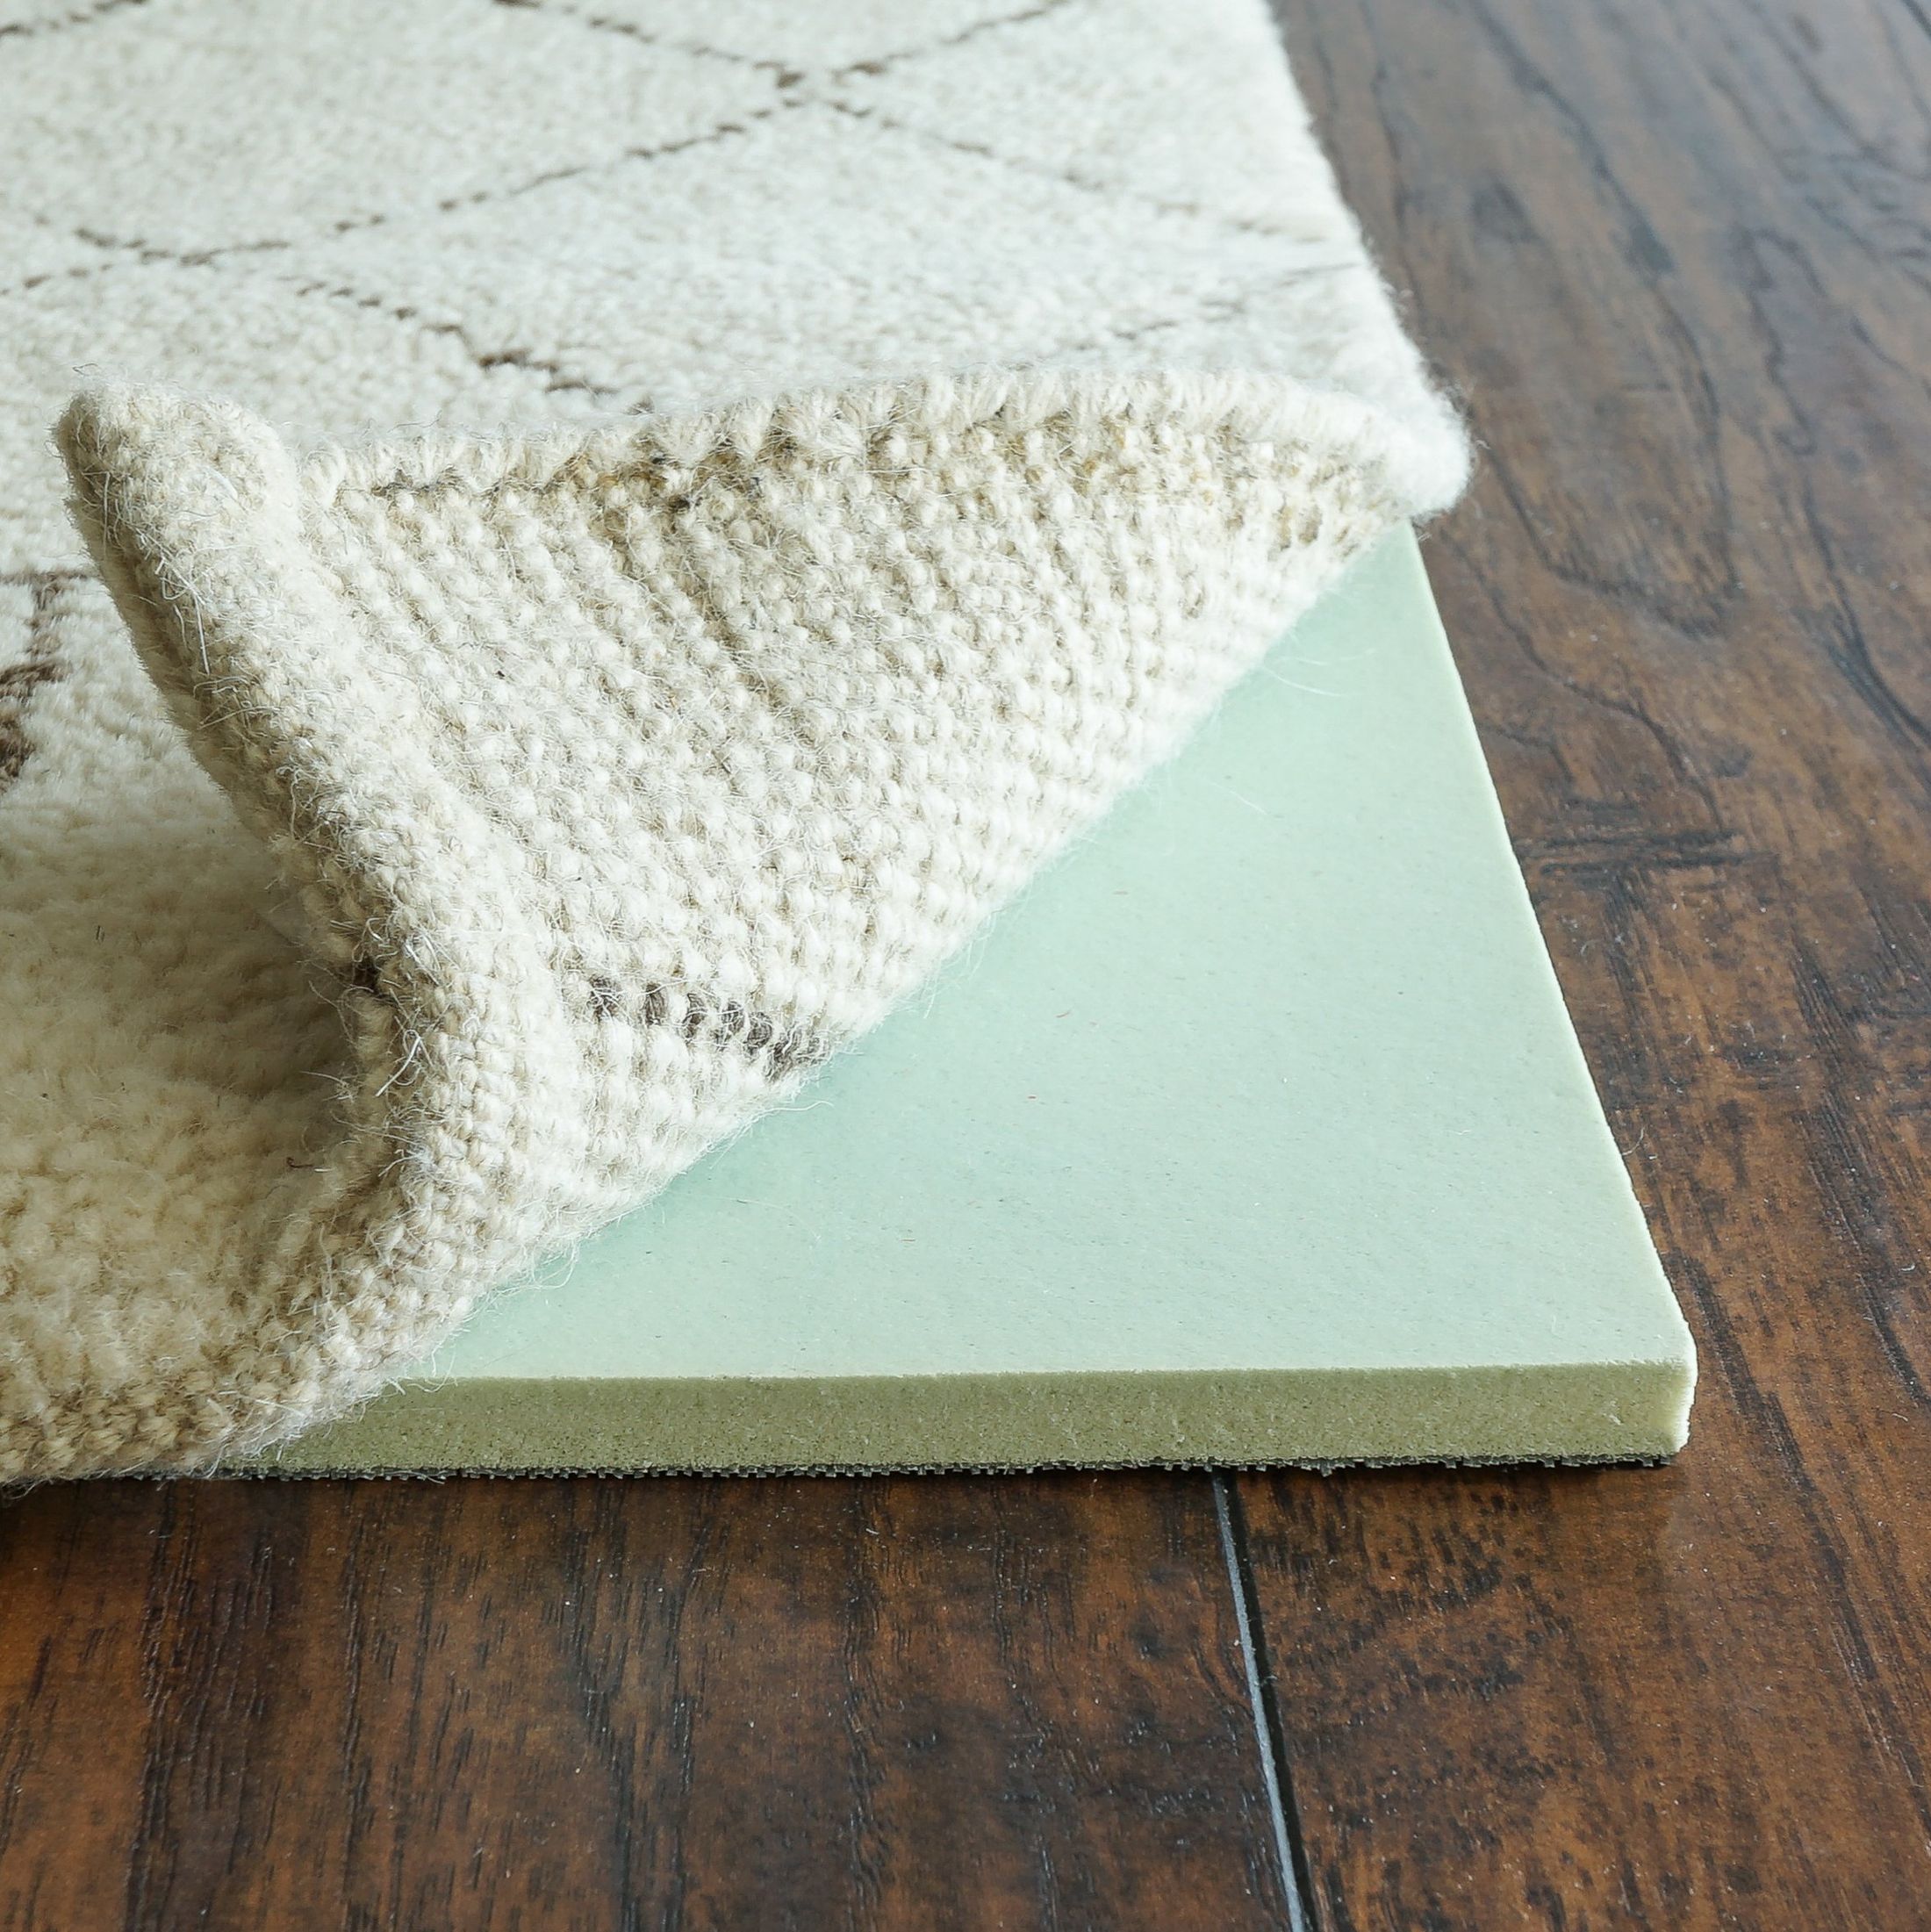 Why Is Carpet Padding or Cushioning Important?